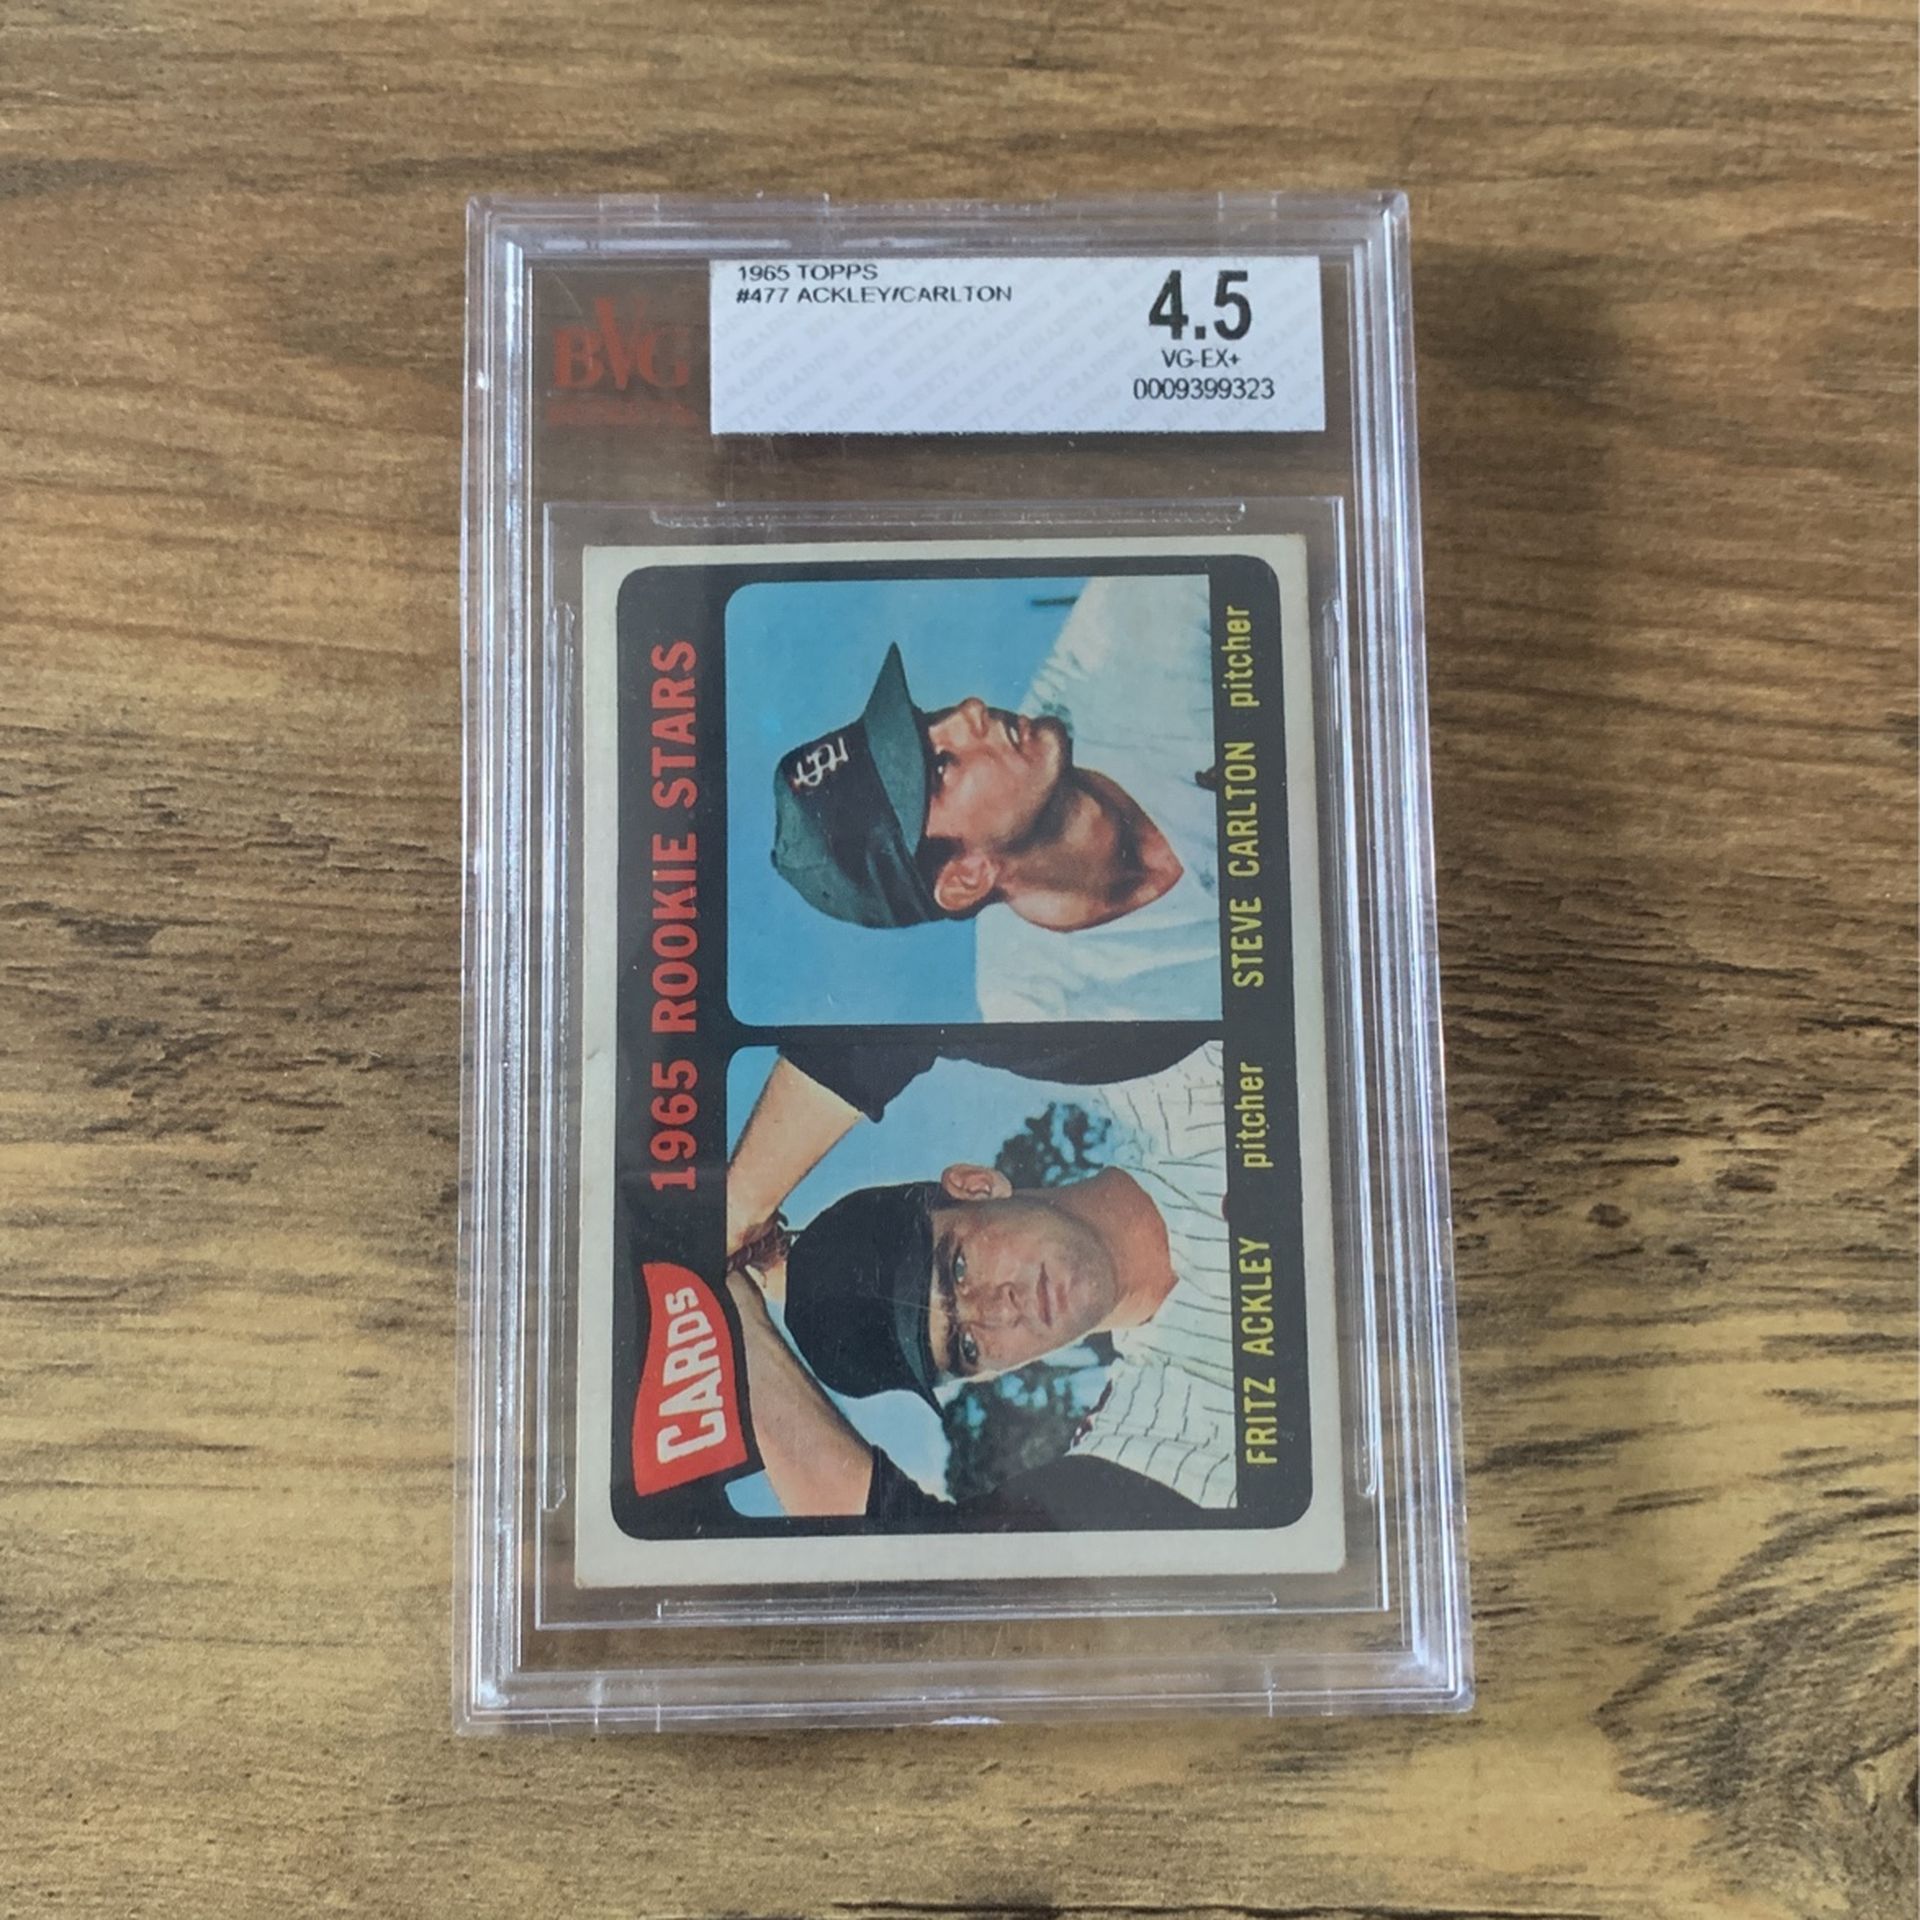 Baseball Cards for Sale in Roselle, IL - OfferUp